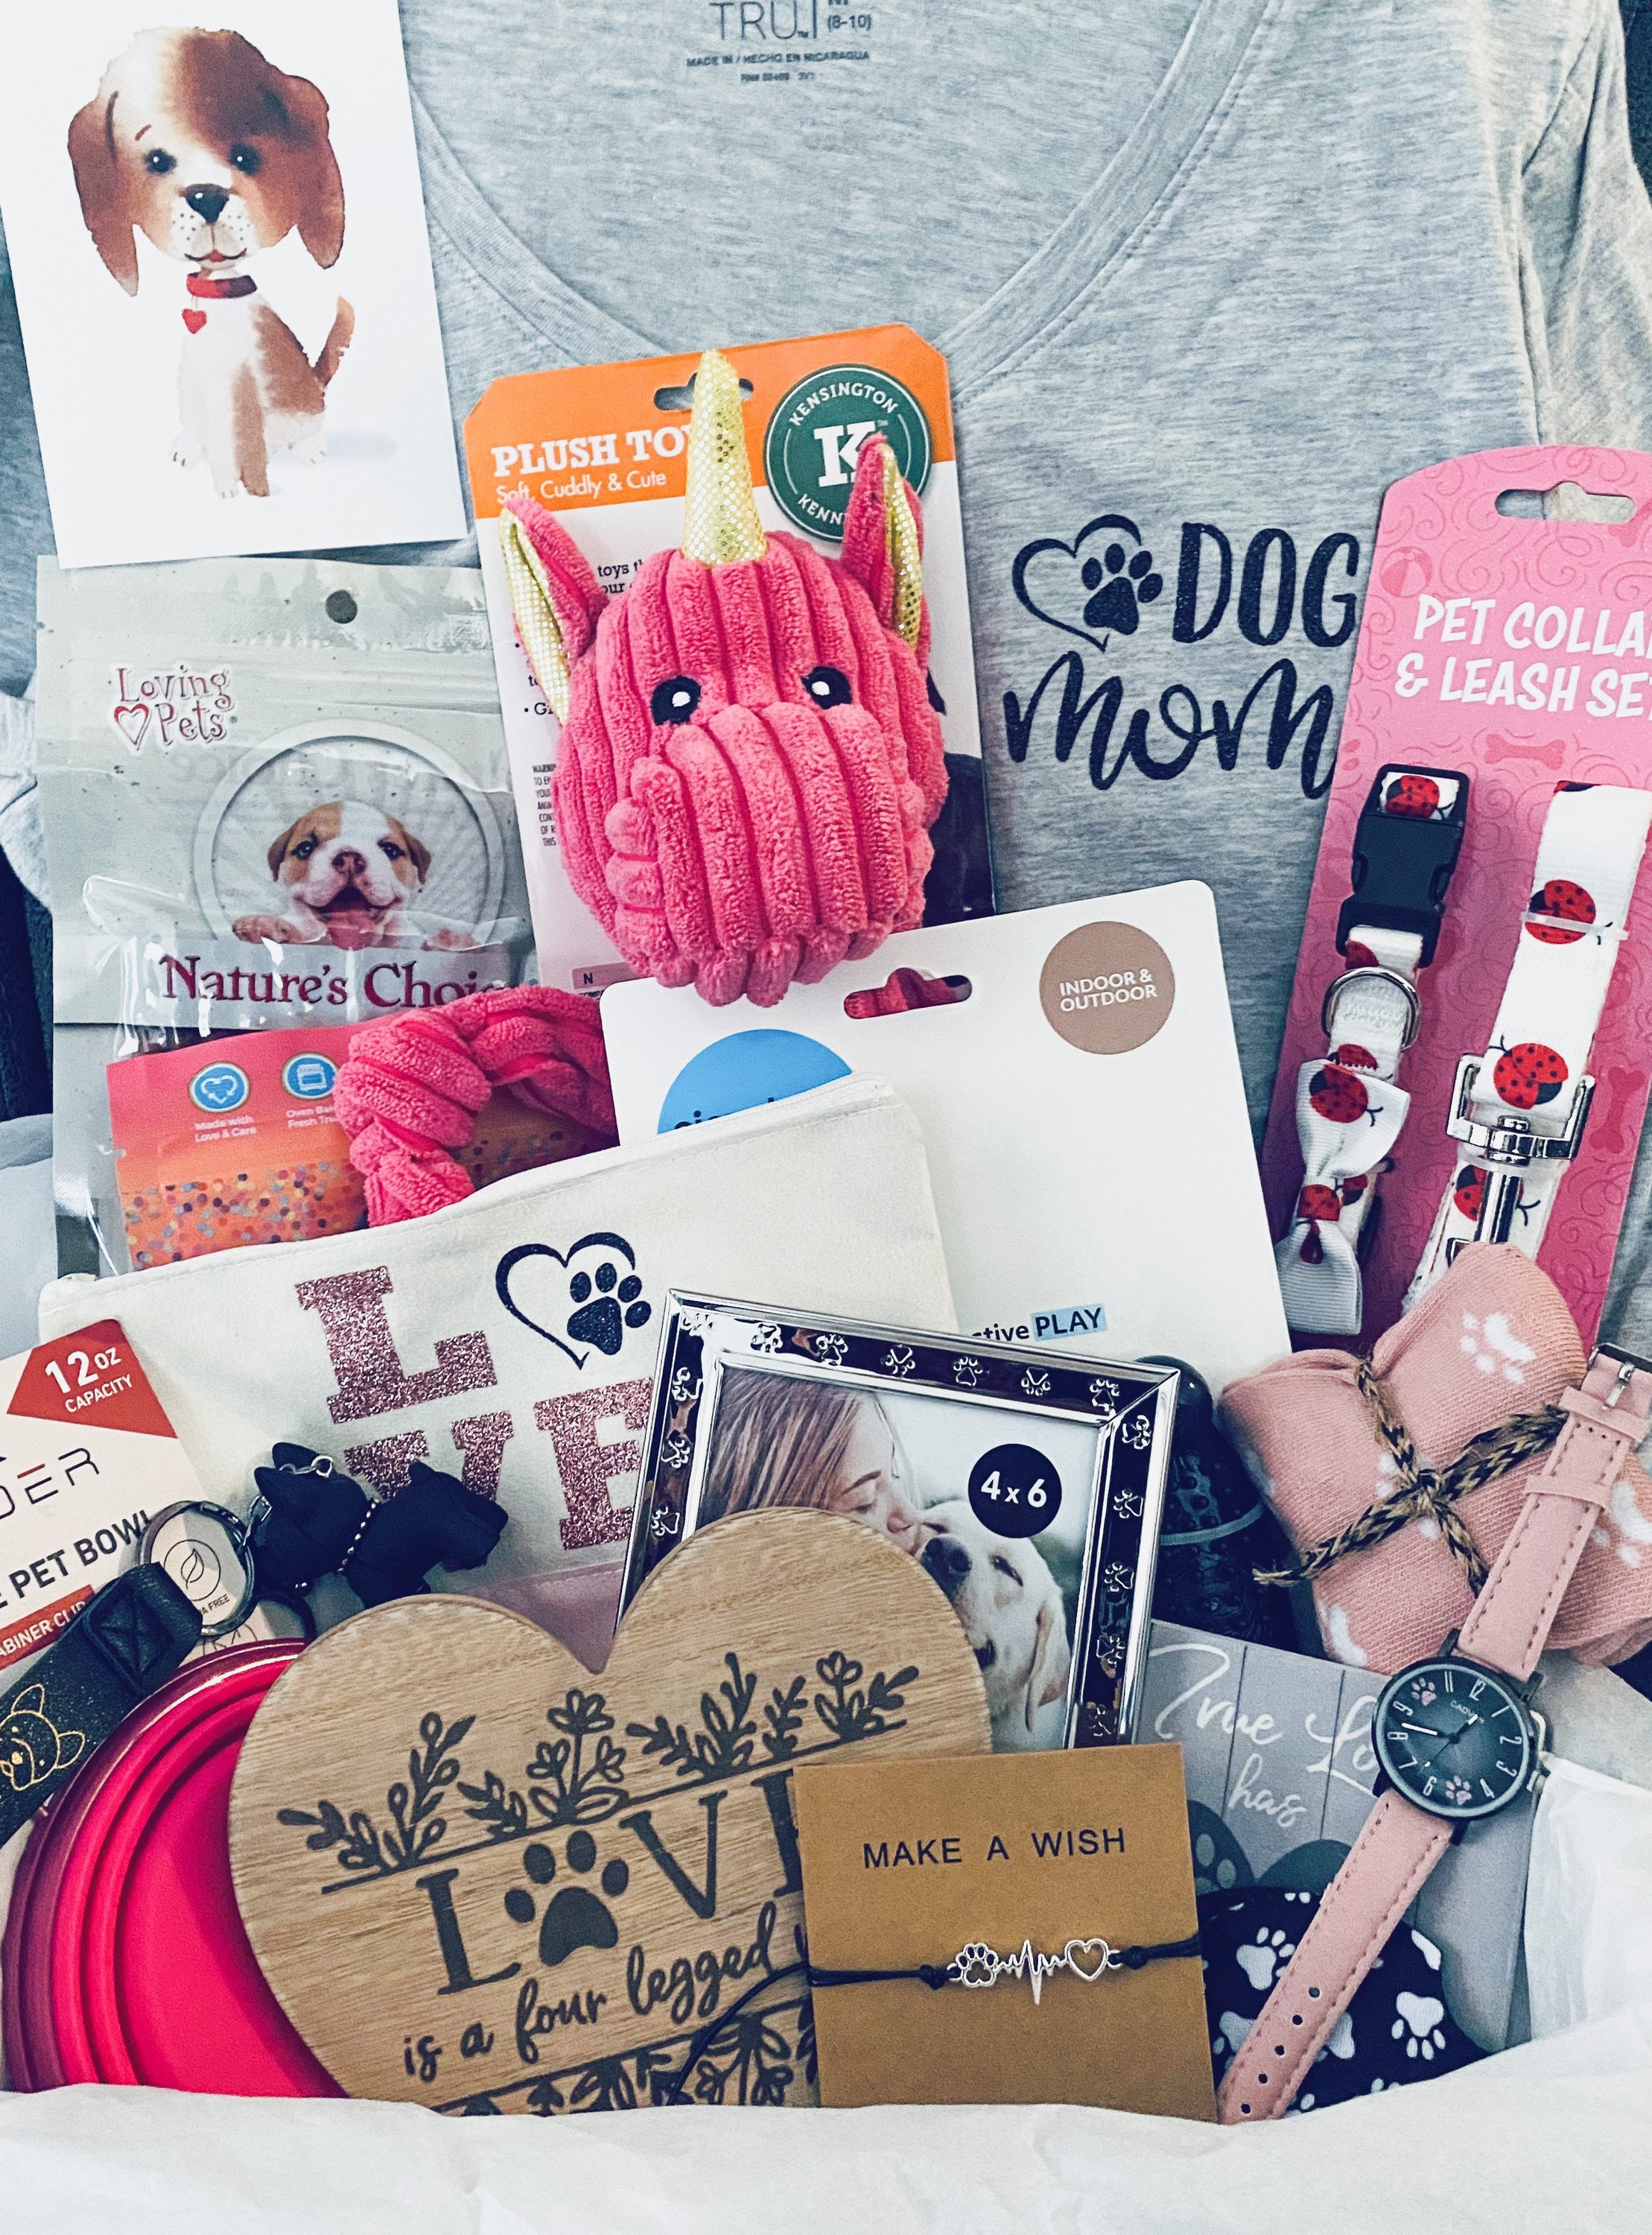 New Puppy Gift Box New Dog Owner Gift Welcome Home New Dog Adoption Gift  New Dog Mom Parents Puppy Care Package Training New Puppy 